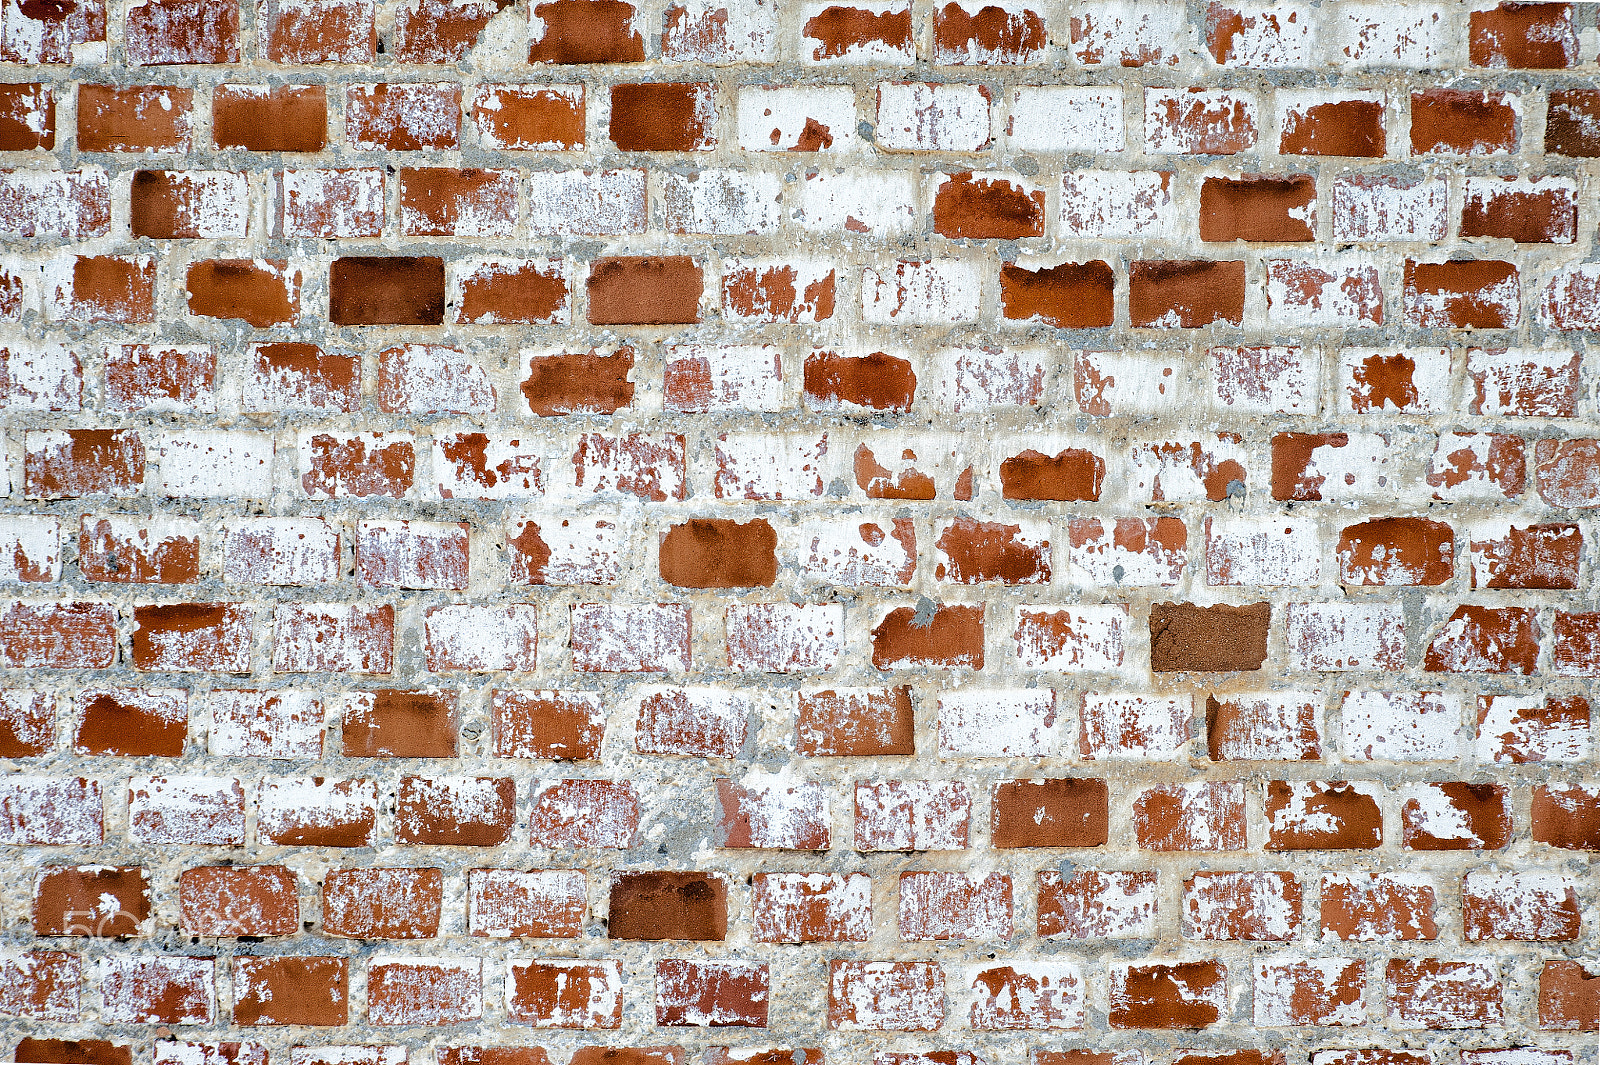 Nikon D700 + Tamron SP 24-70mm F2.8 Di VC USD sample photo. Wall of red and white bricks without graffiti photography